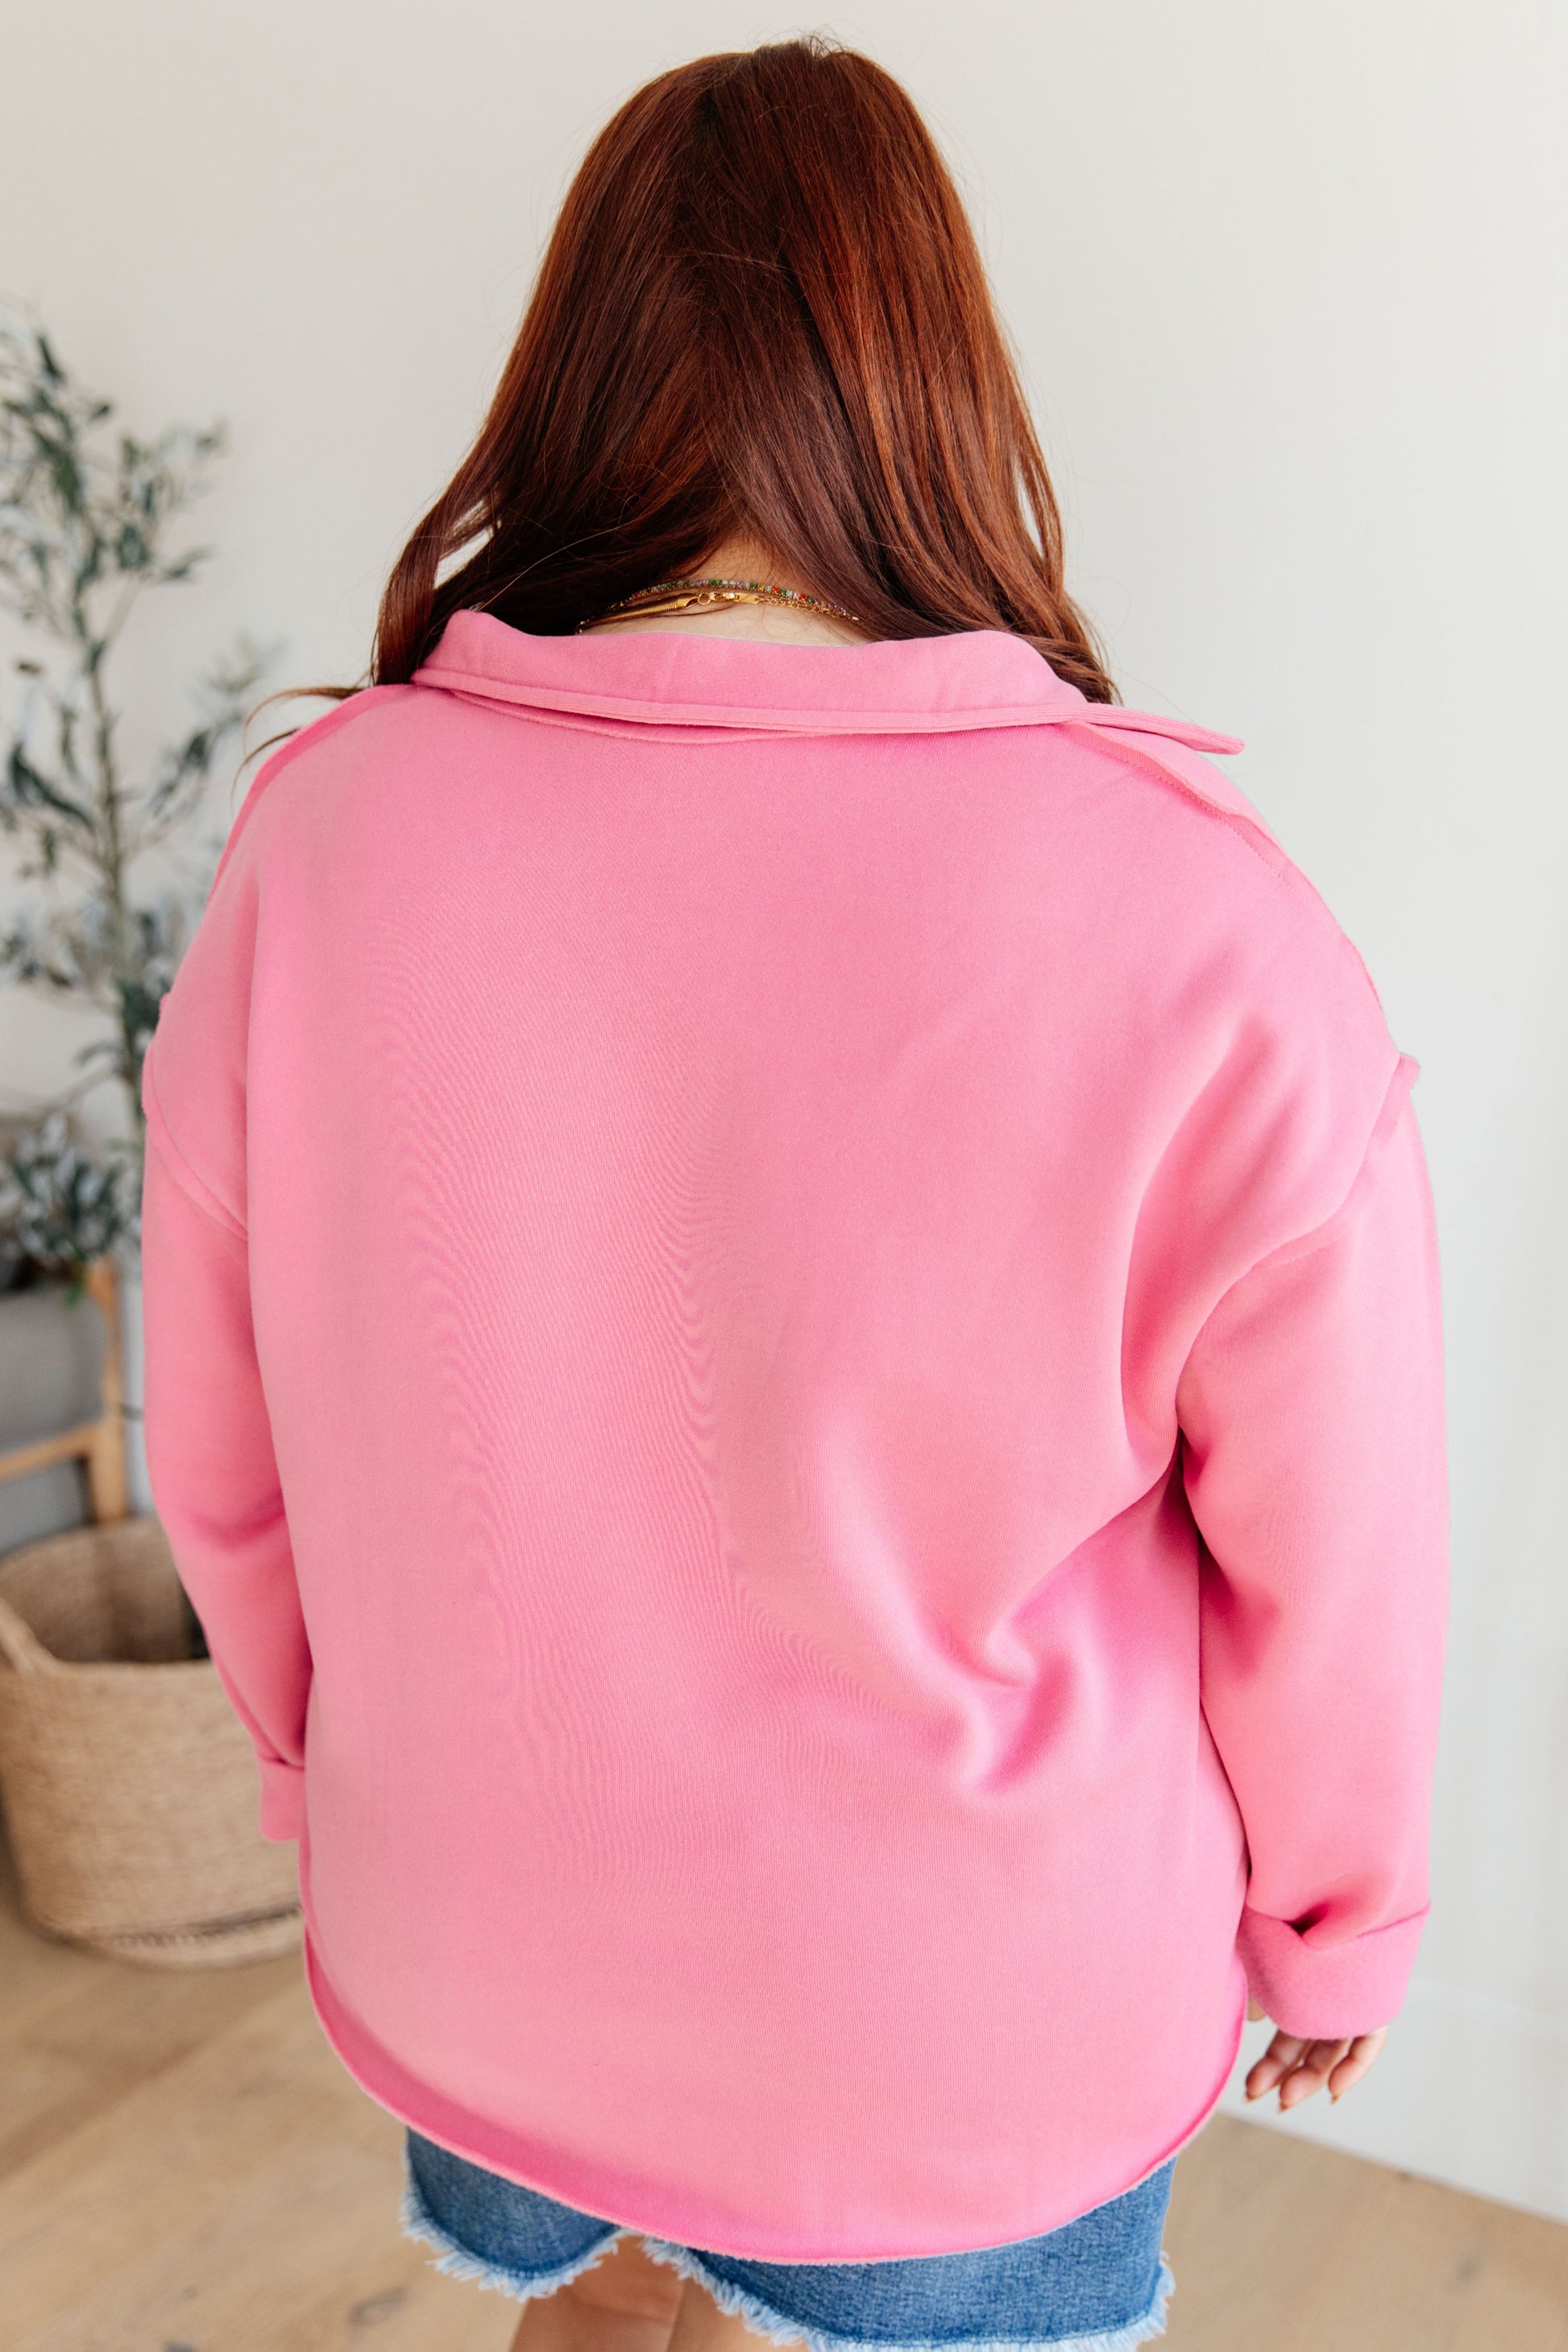 Same Ol’ Situation Collared Pullover in Hot Pink - Womens